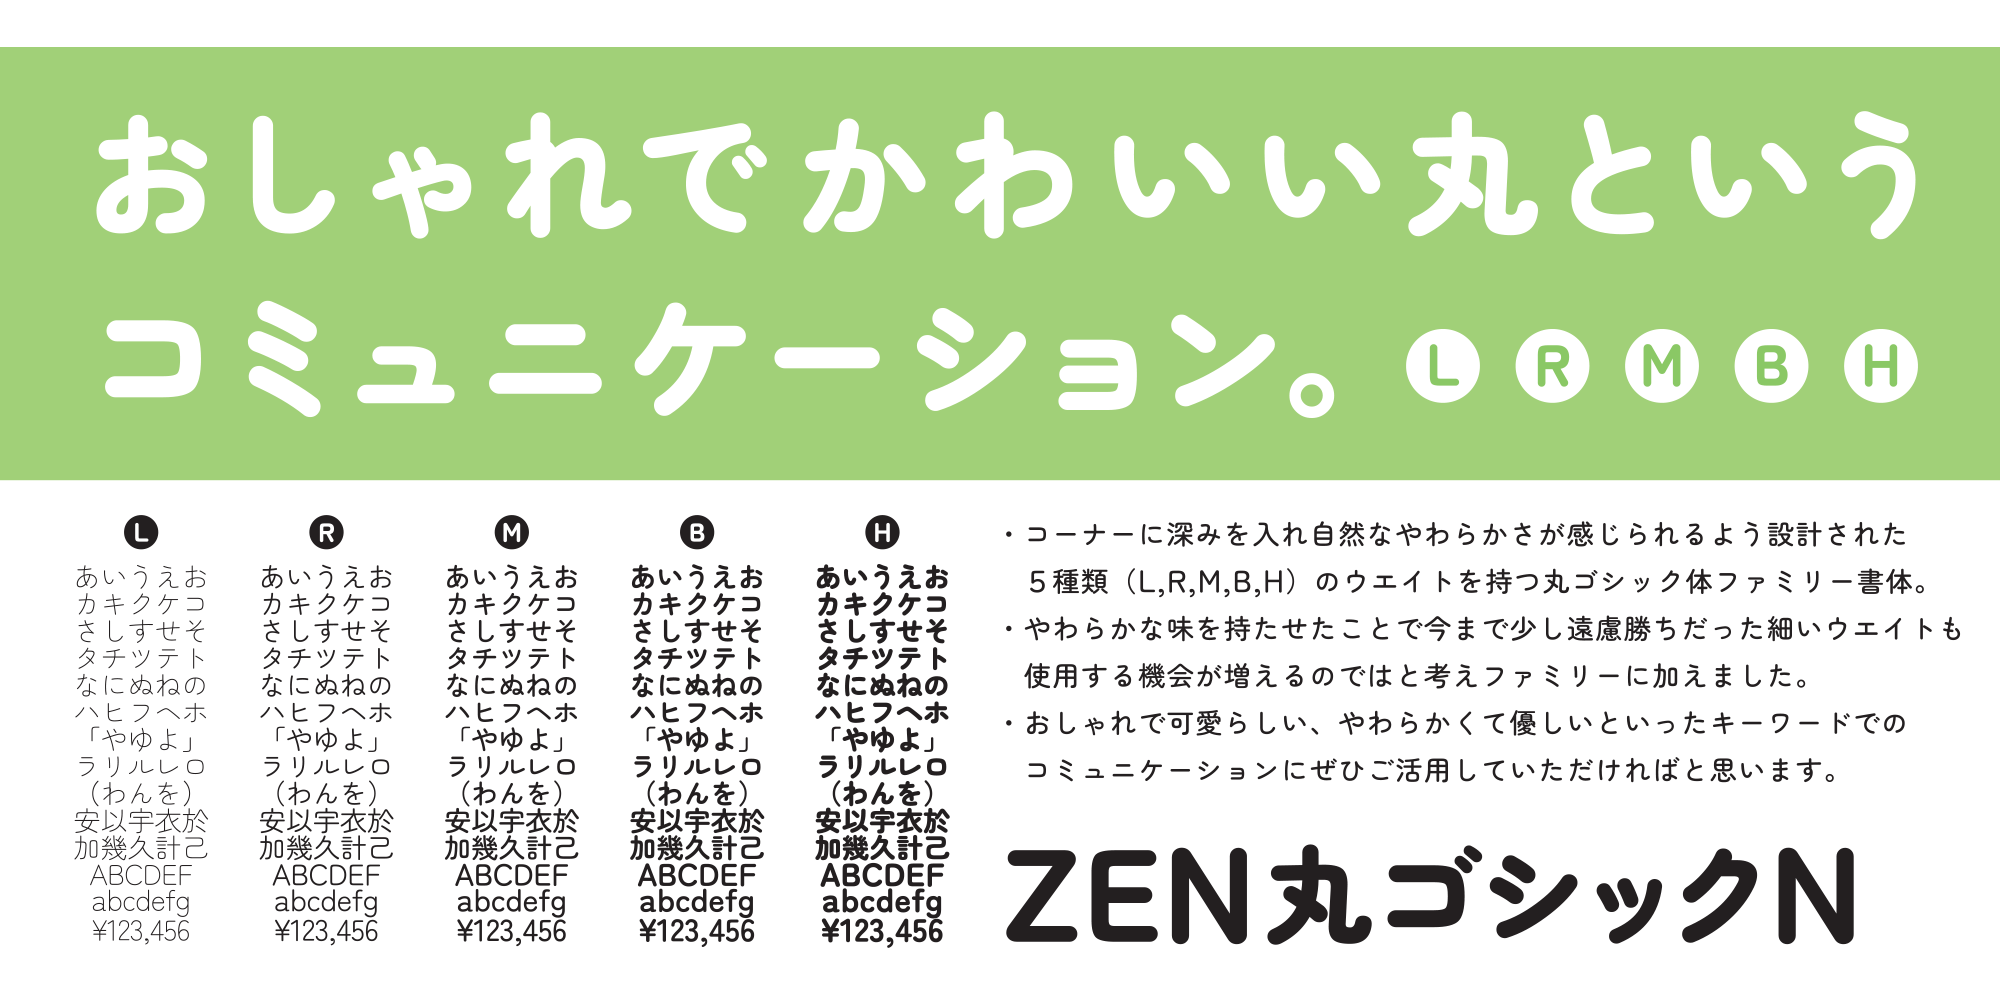 Card displaying Zen Maru Gothic typeface in various styles